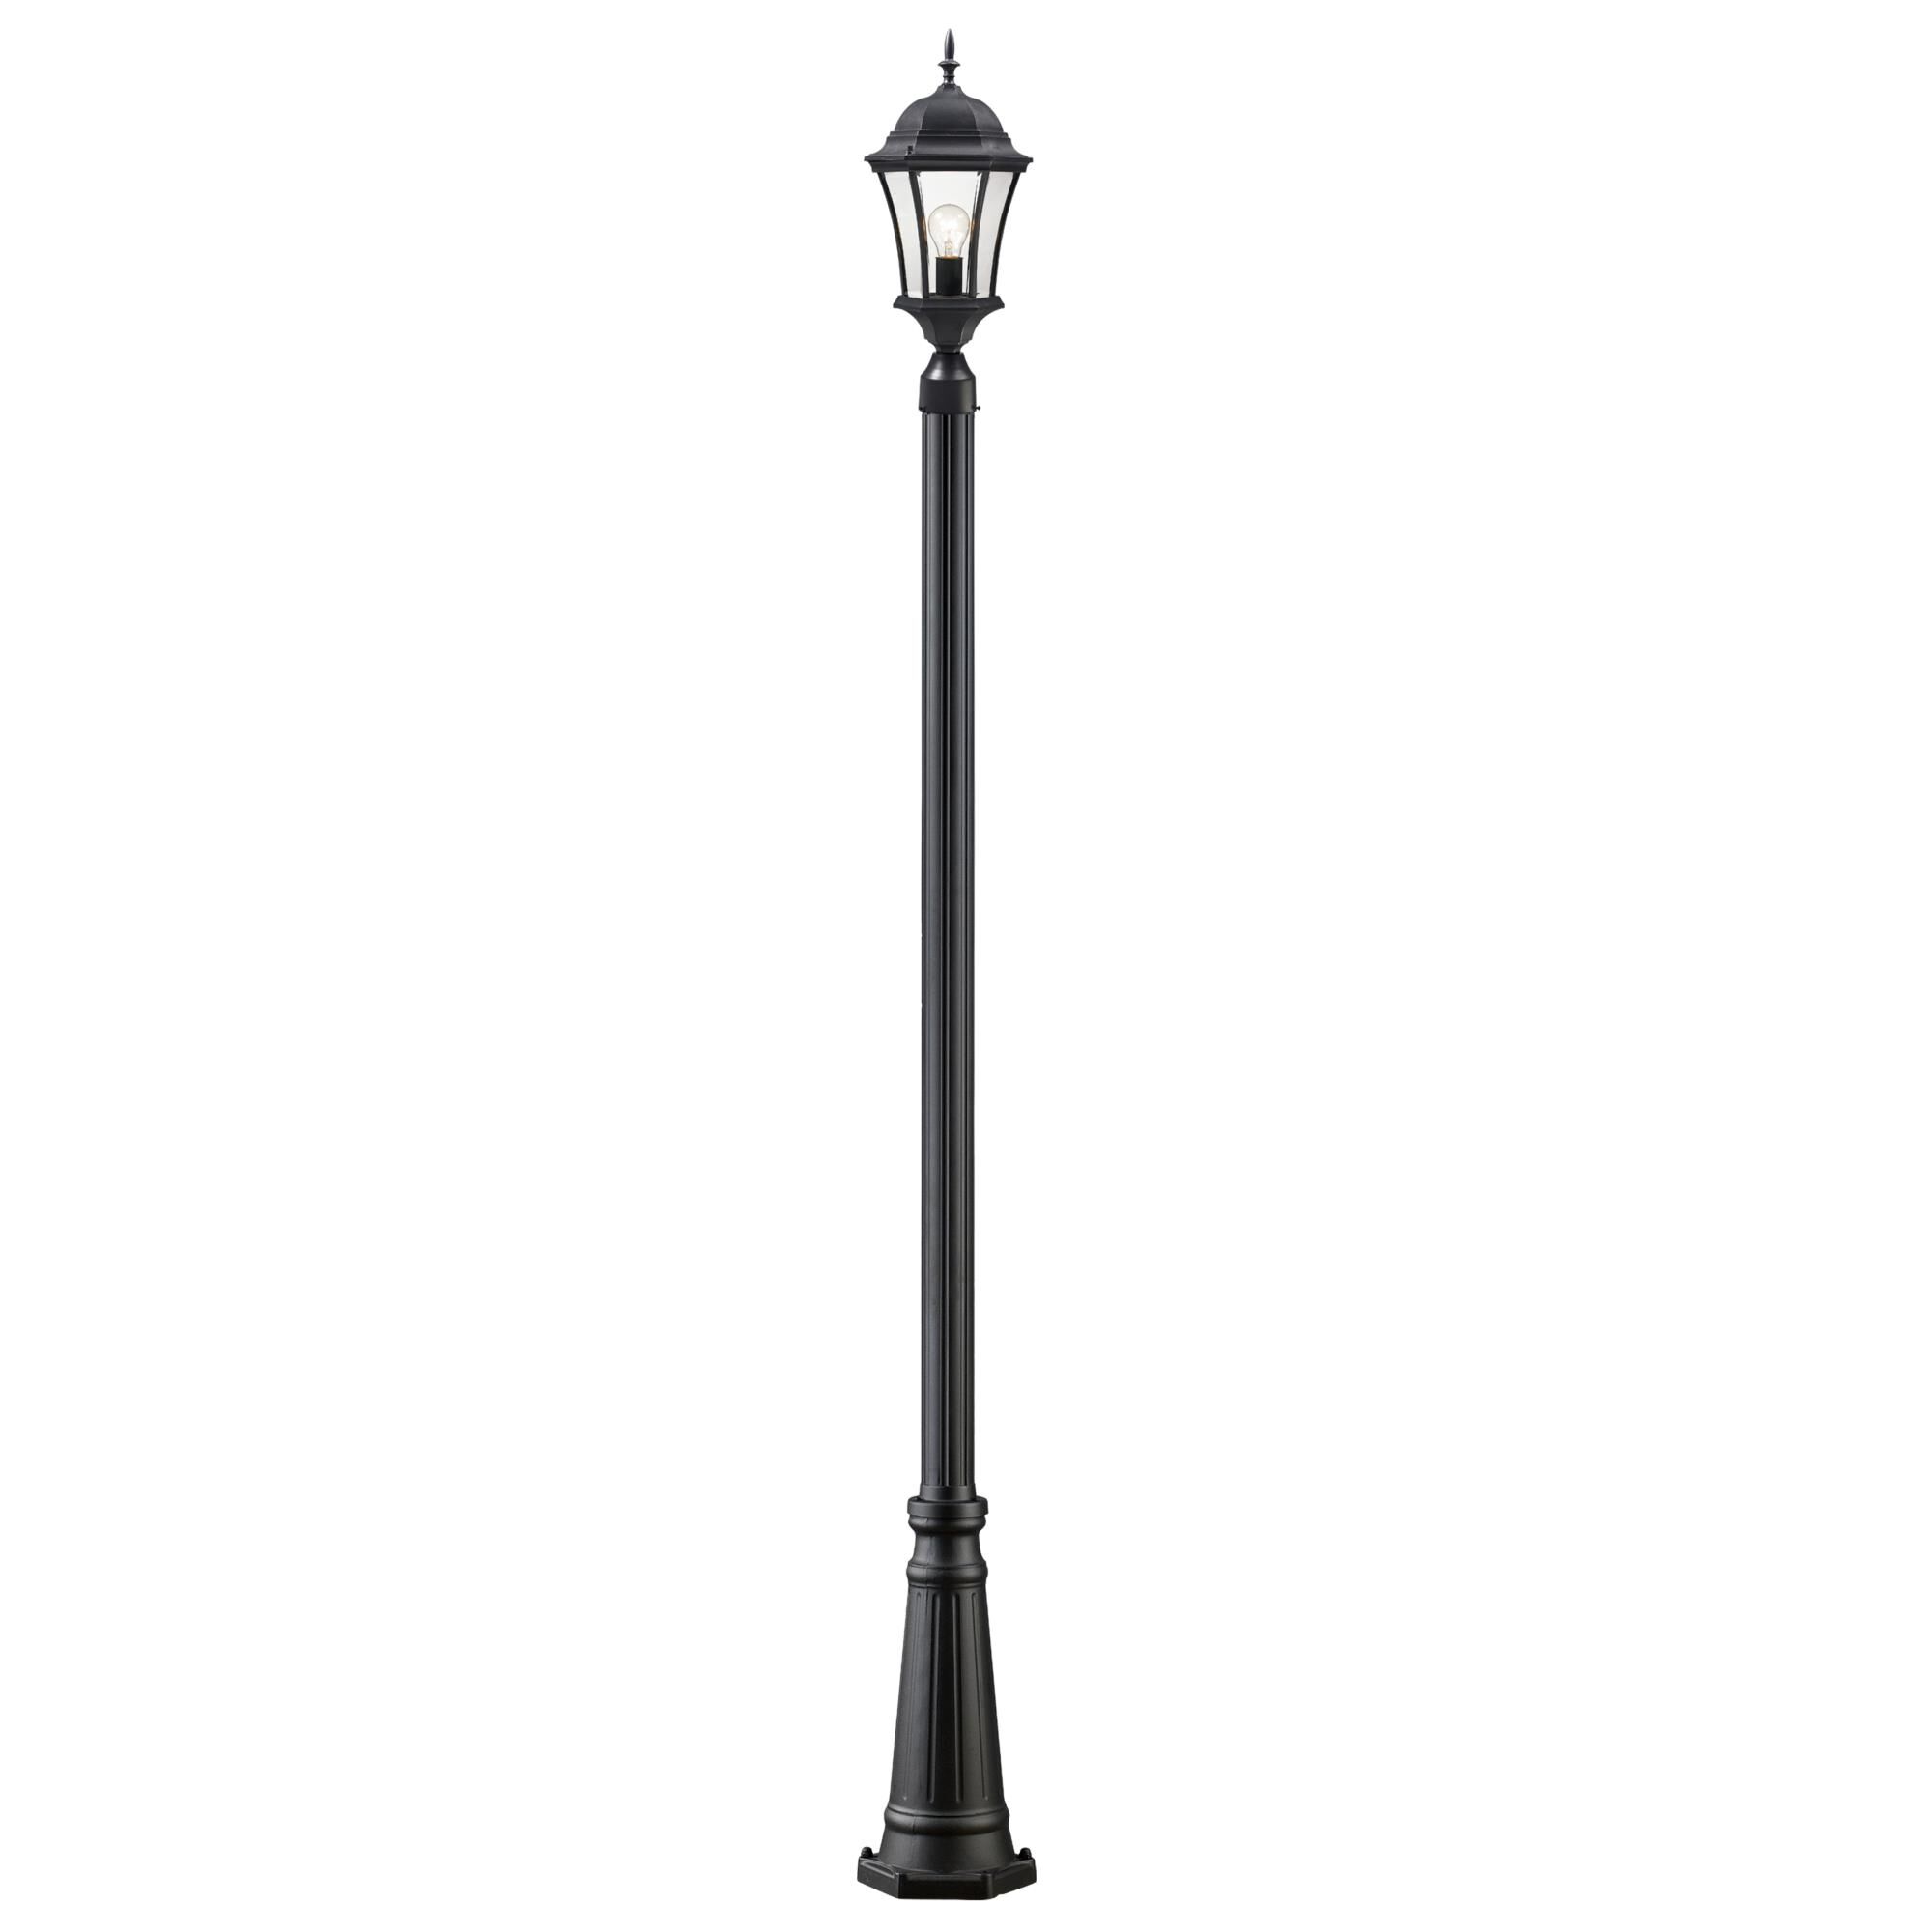 Photos - Floodlight / Garden Lamps Z-Lite Wakefield 116 Inch Tall Outdoor Post Lamp Wakefield - 522PHM-519P-B